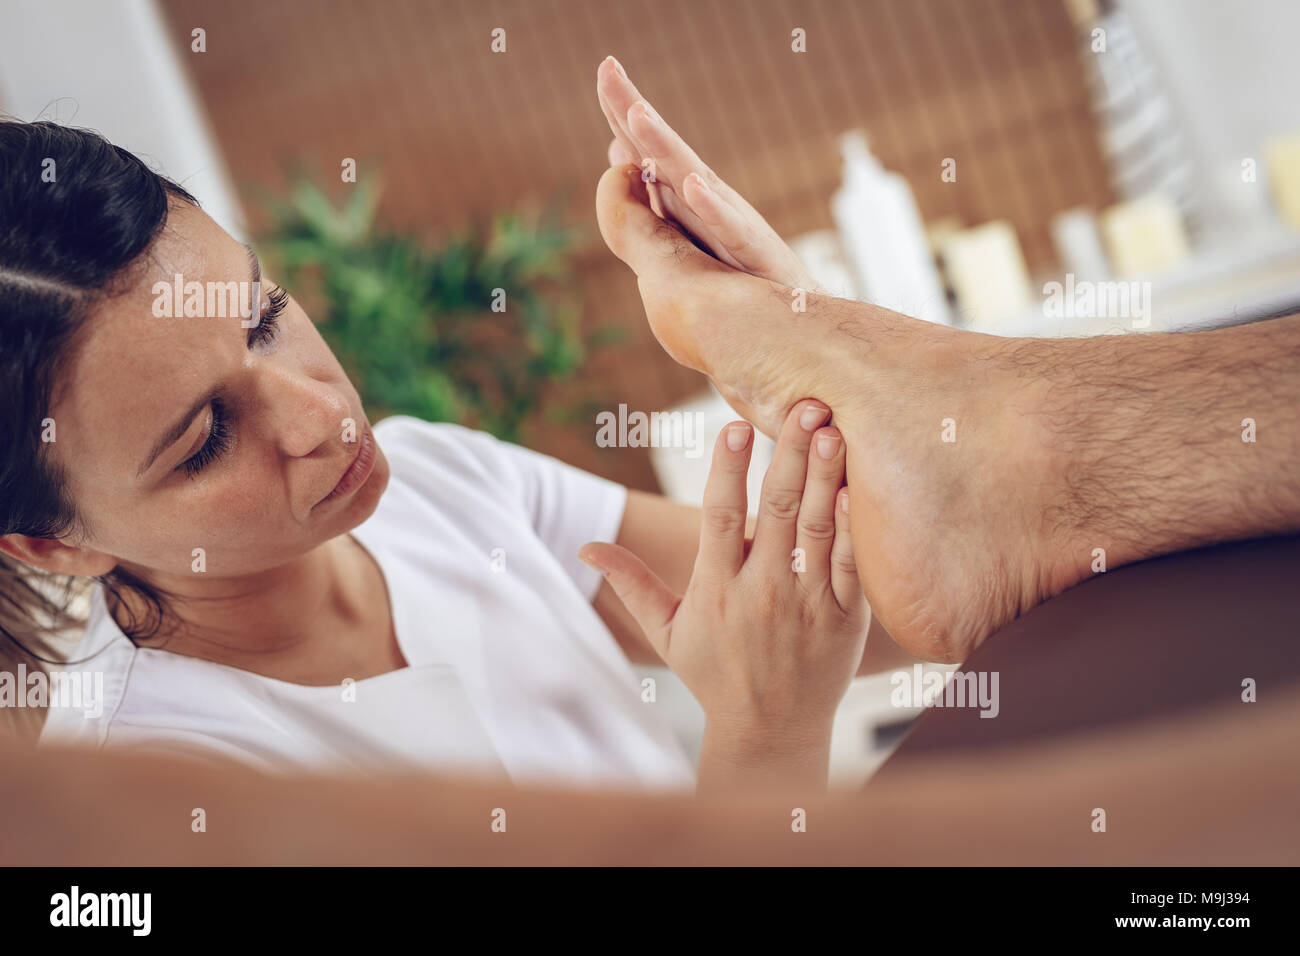 Close-up of a young female therapist massaging young man's foot at beauty salon. Stock Photo